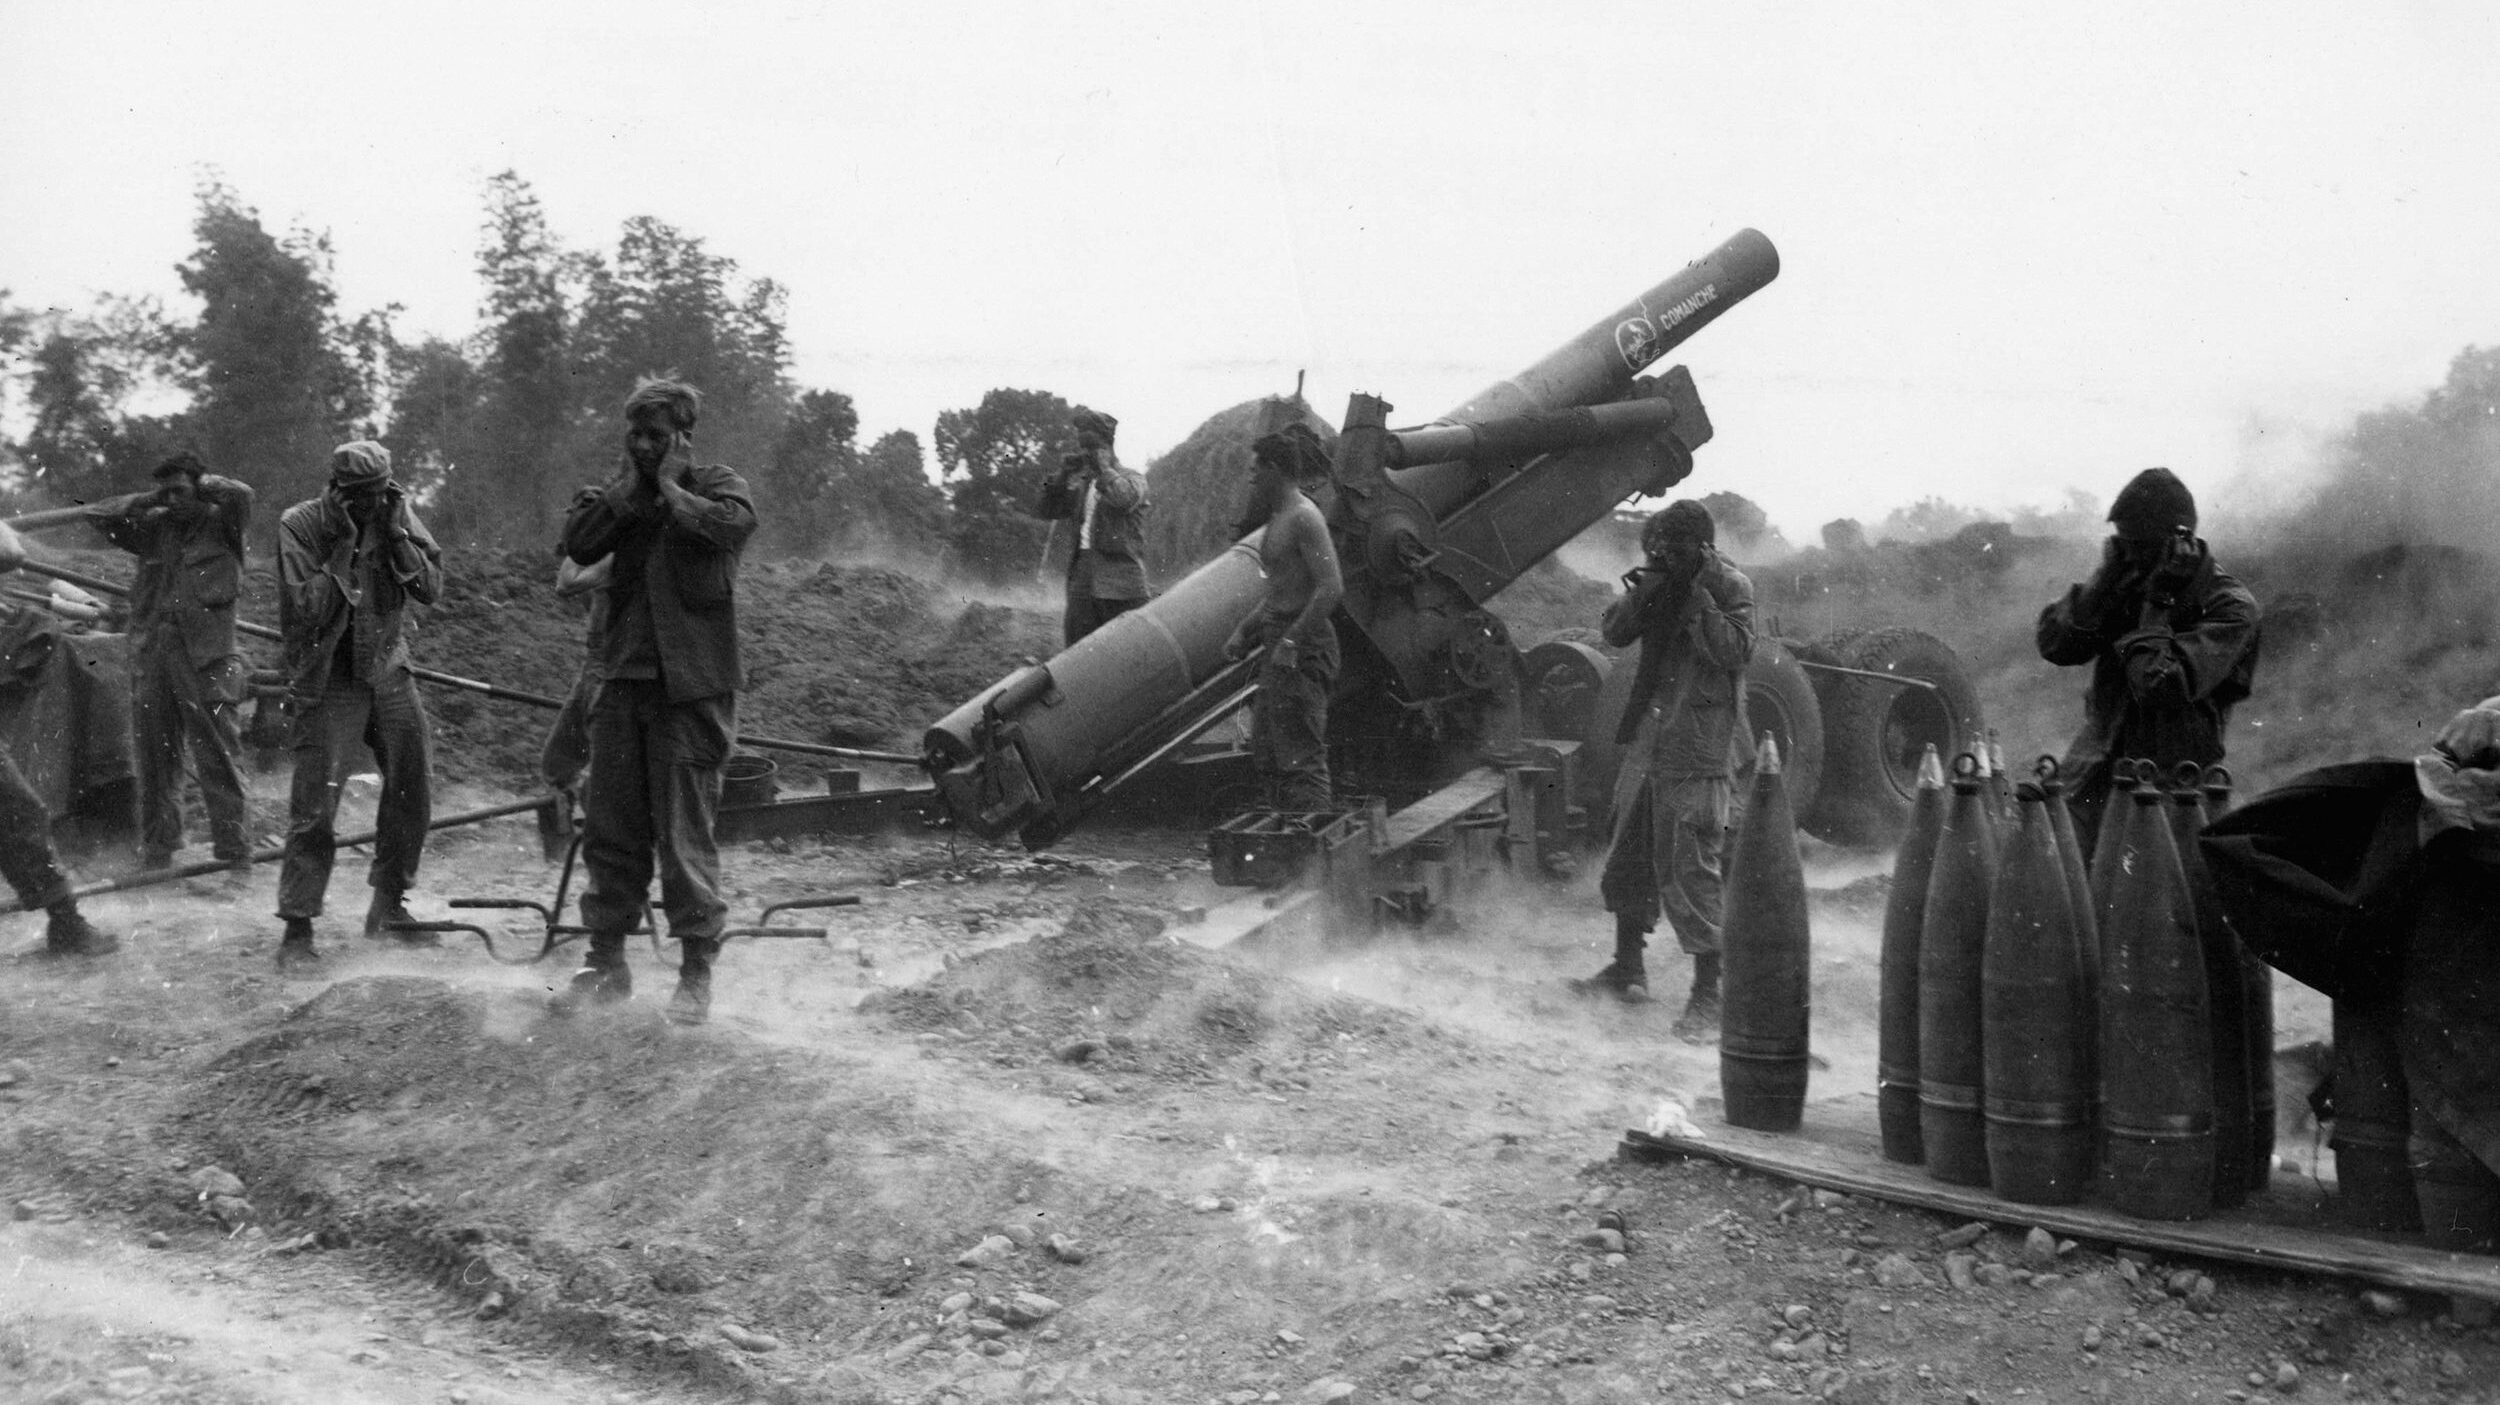 The crew of an 8-inch howitzer nicknamed “Comanche” fires at pockets of Japanese resistance near Ipo Dam.